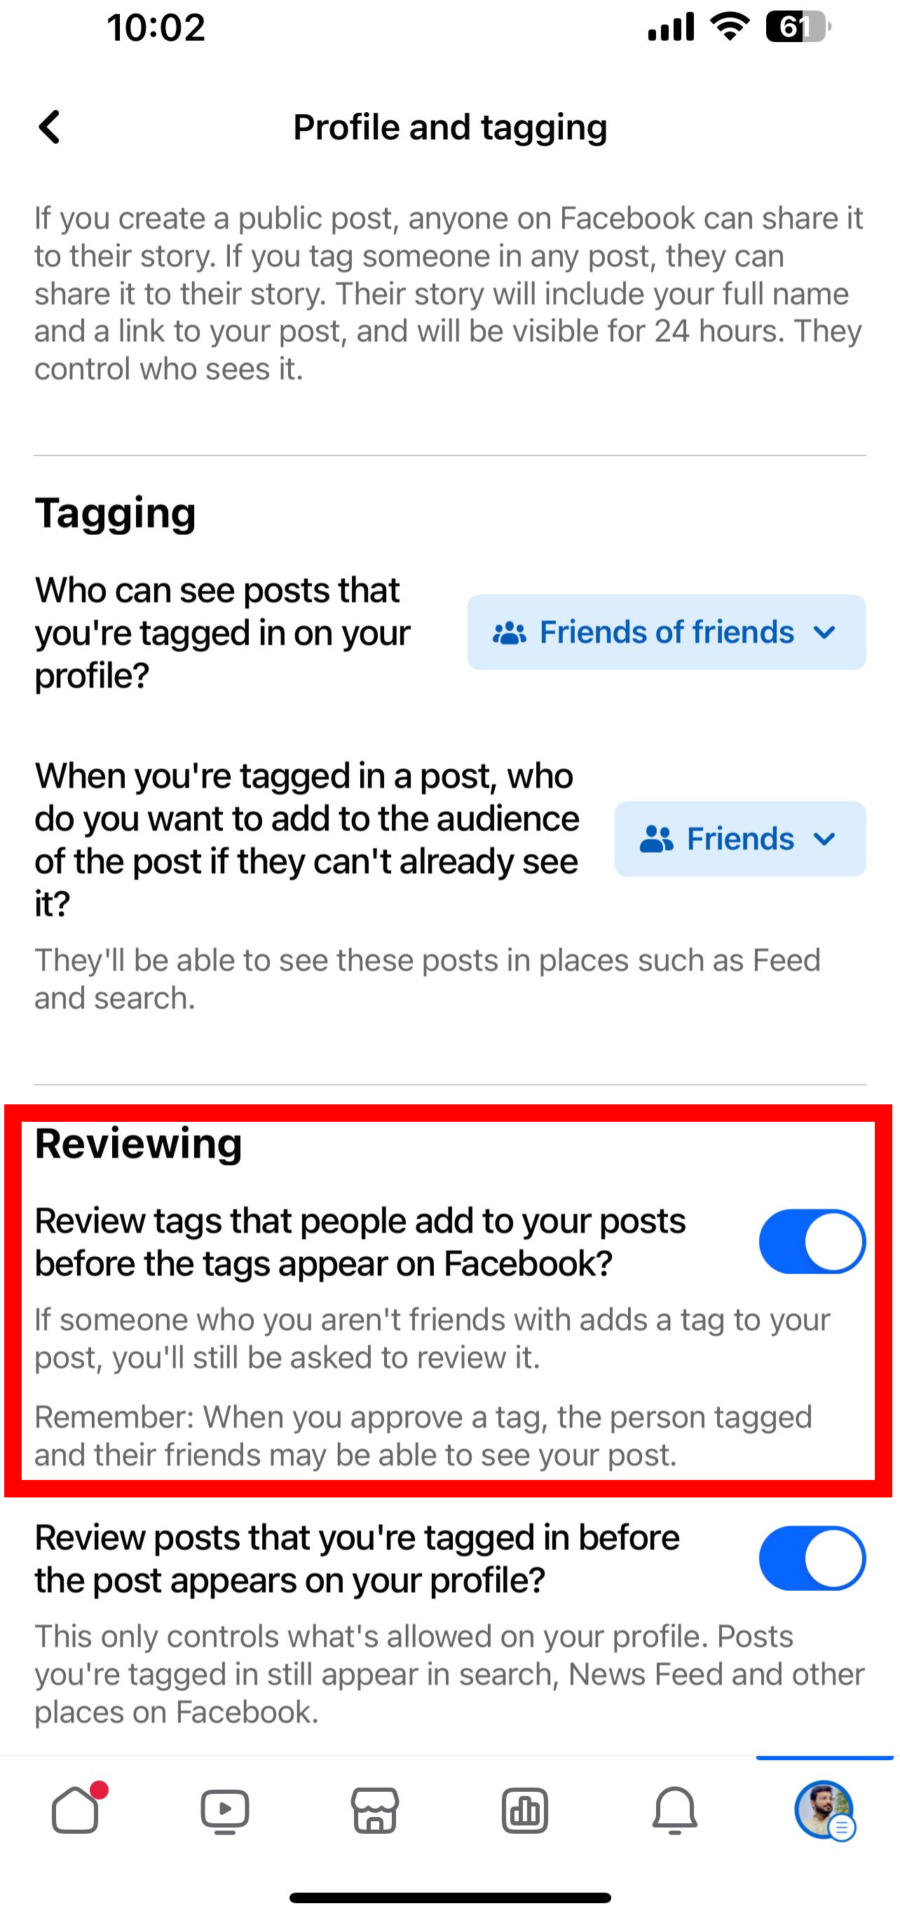 Review the posts that you are tagged in